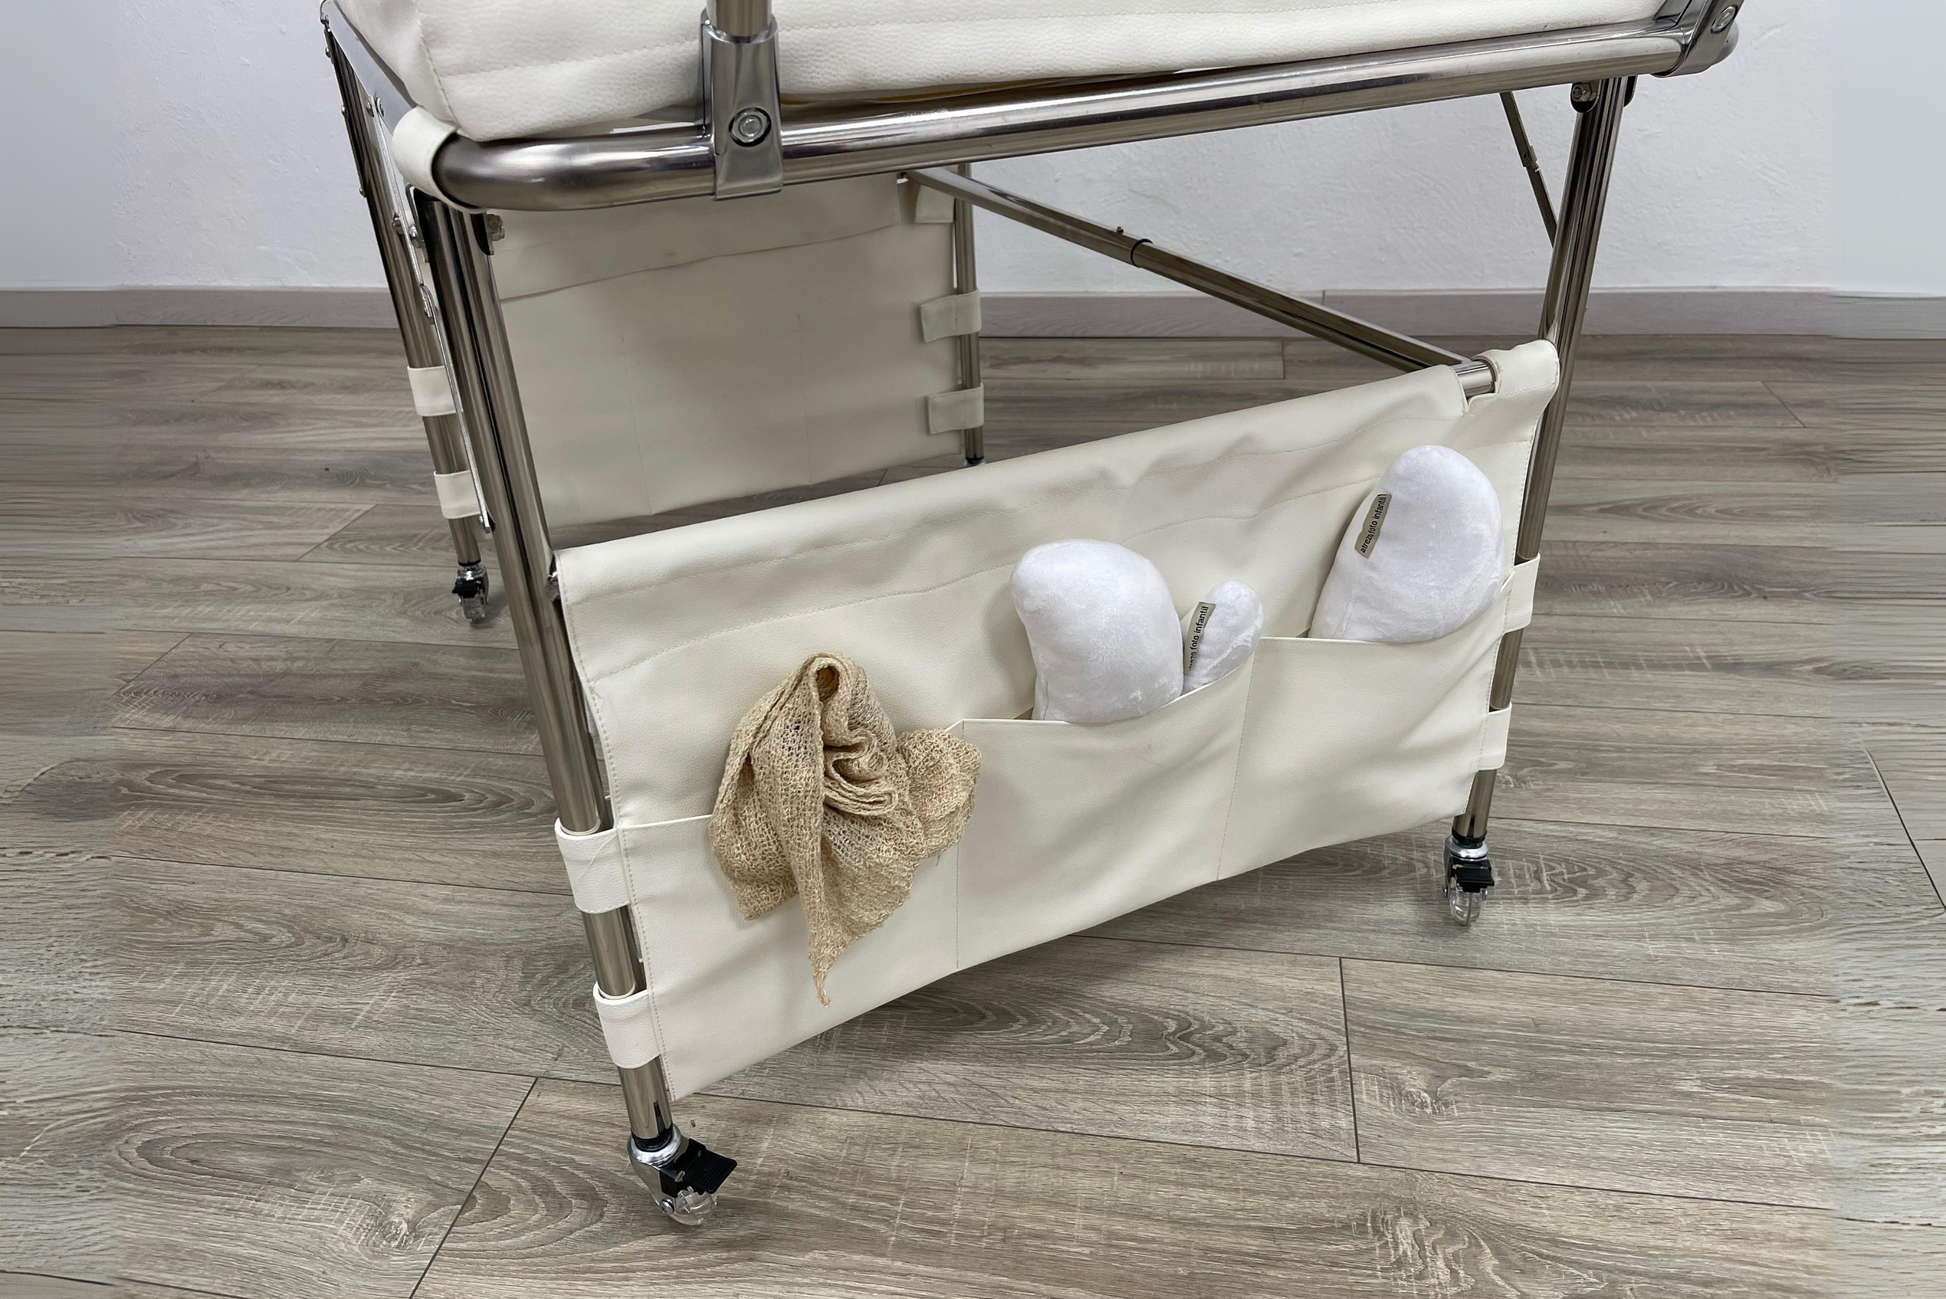 The Newborn Posing Table, a baby photography posing table, offers same-day shipping from the USA, setting it apart from Paloma Schell.